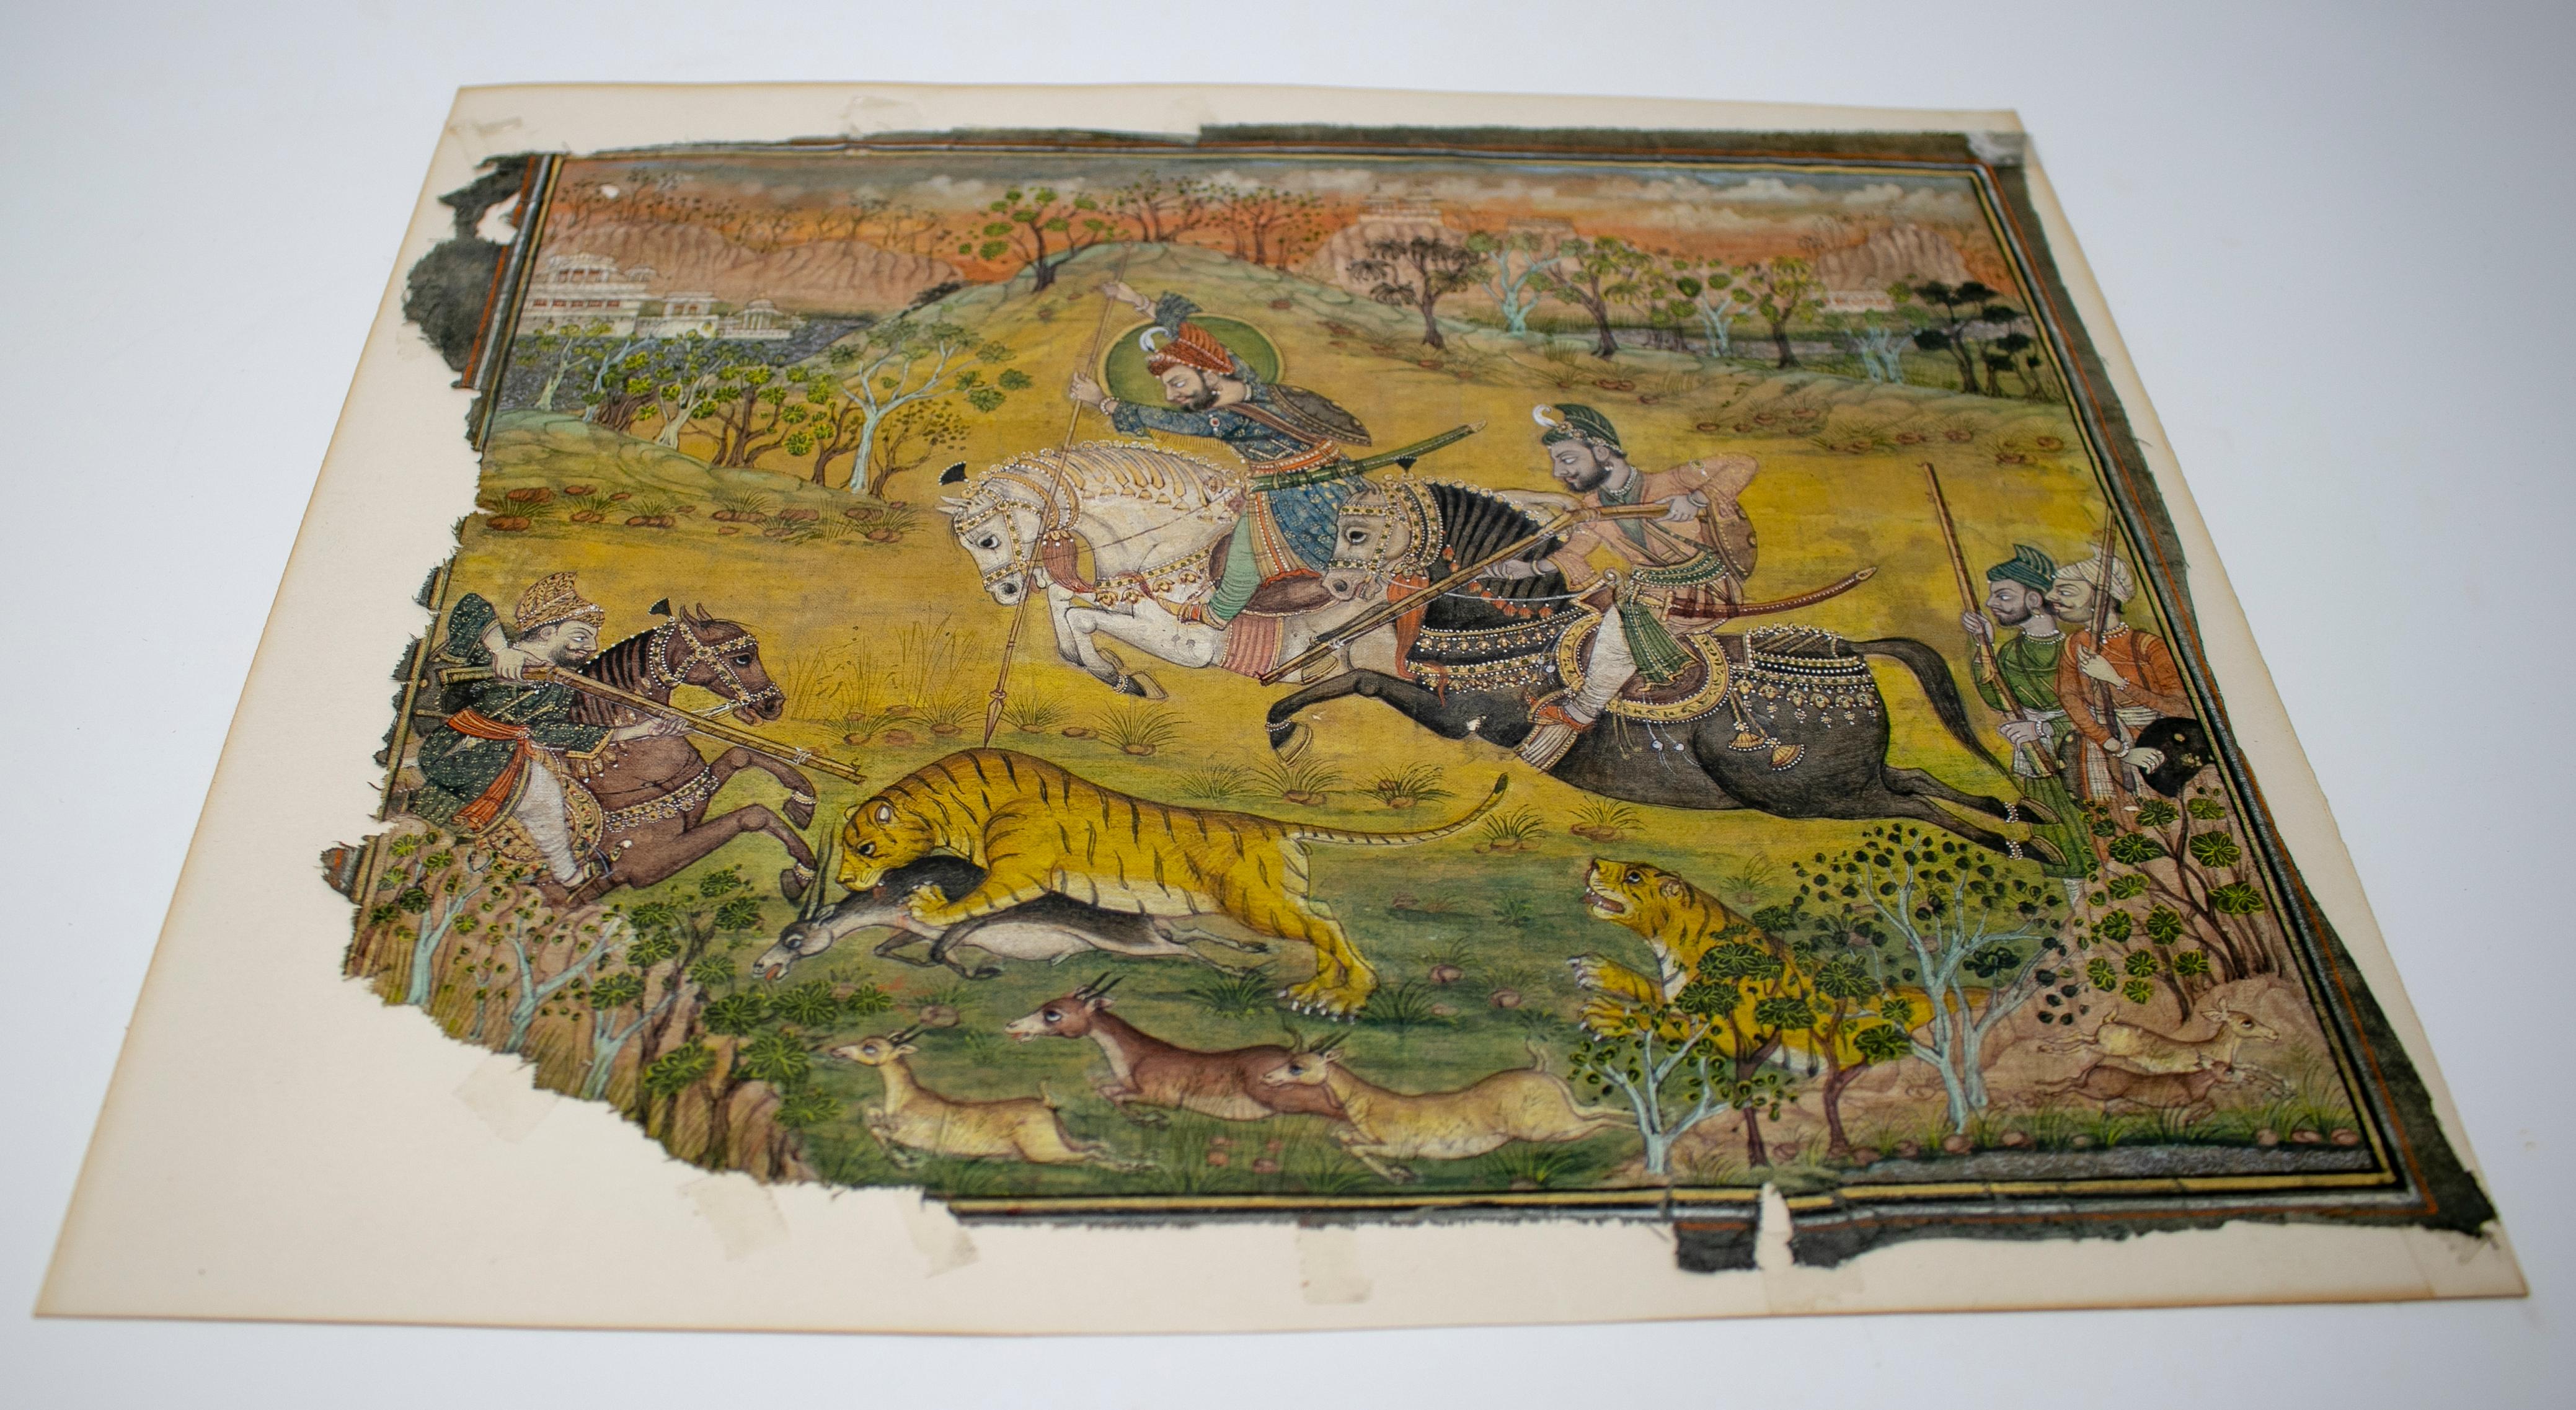 19th century hand painted drawing on Indian cloth.